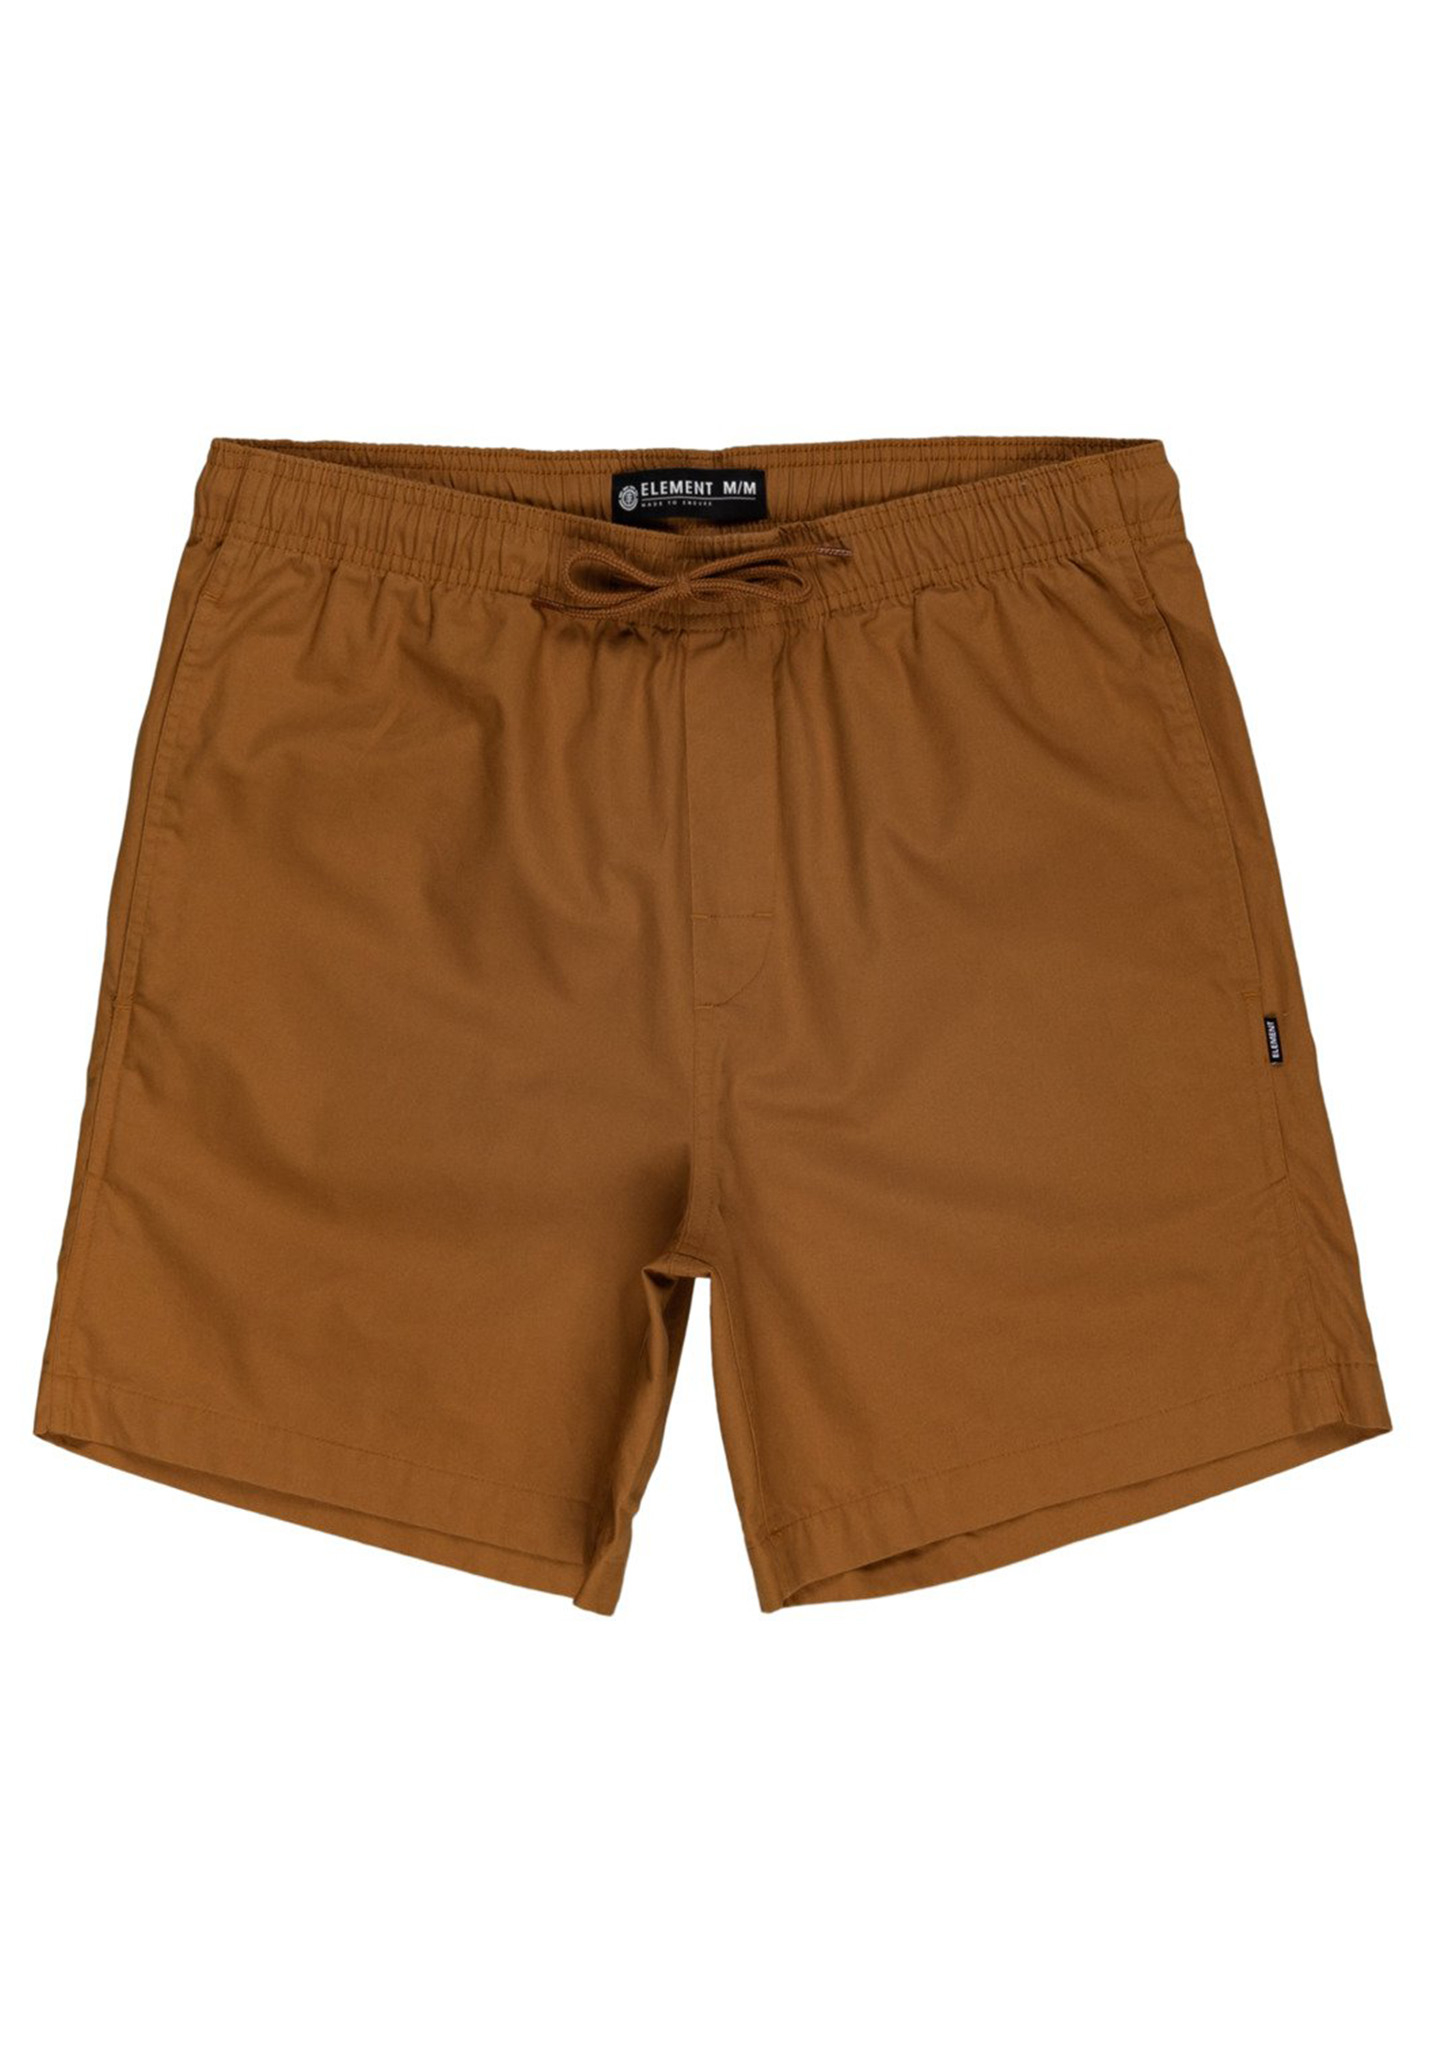 Element Vacation 17" Chinos gold brown XL